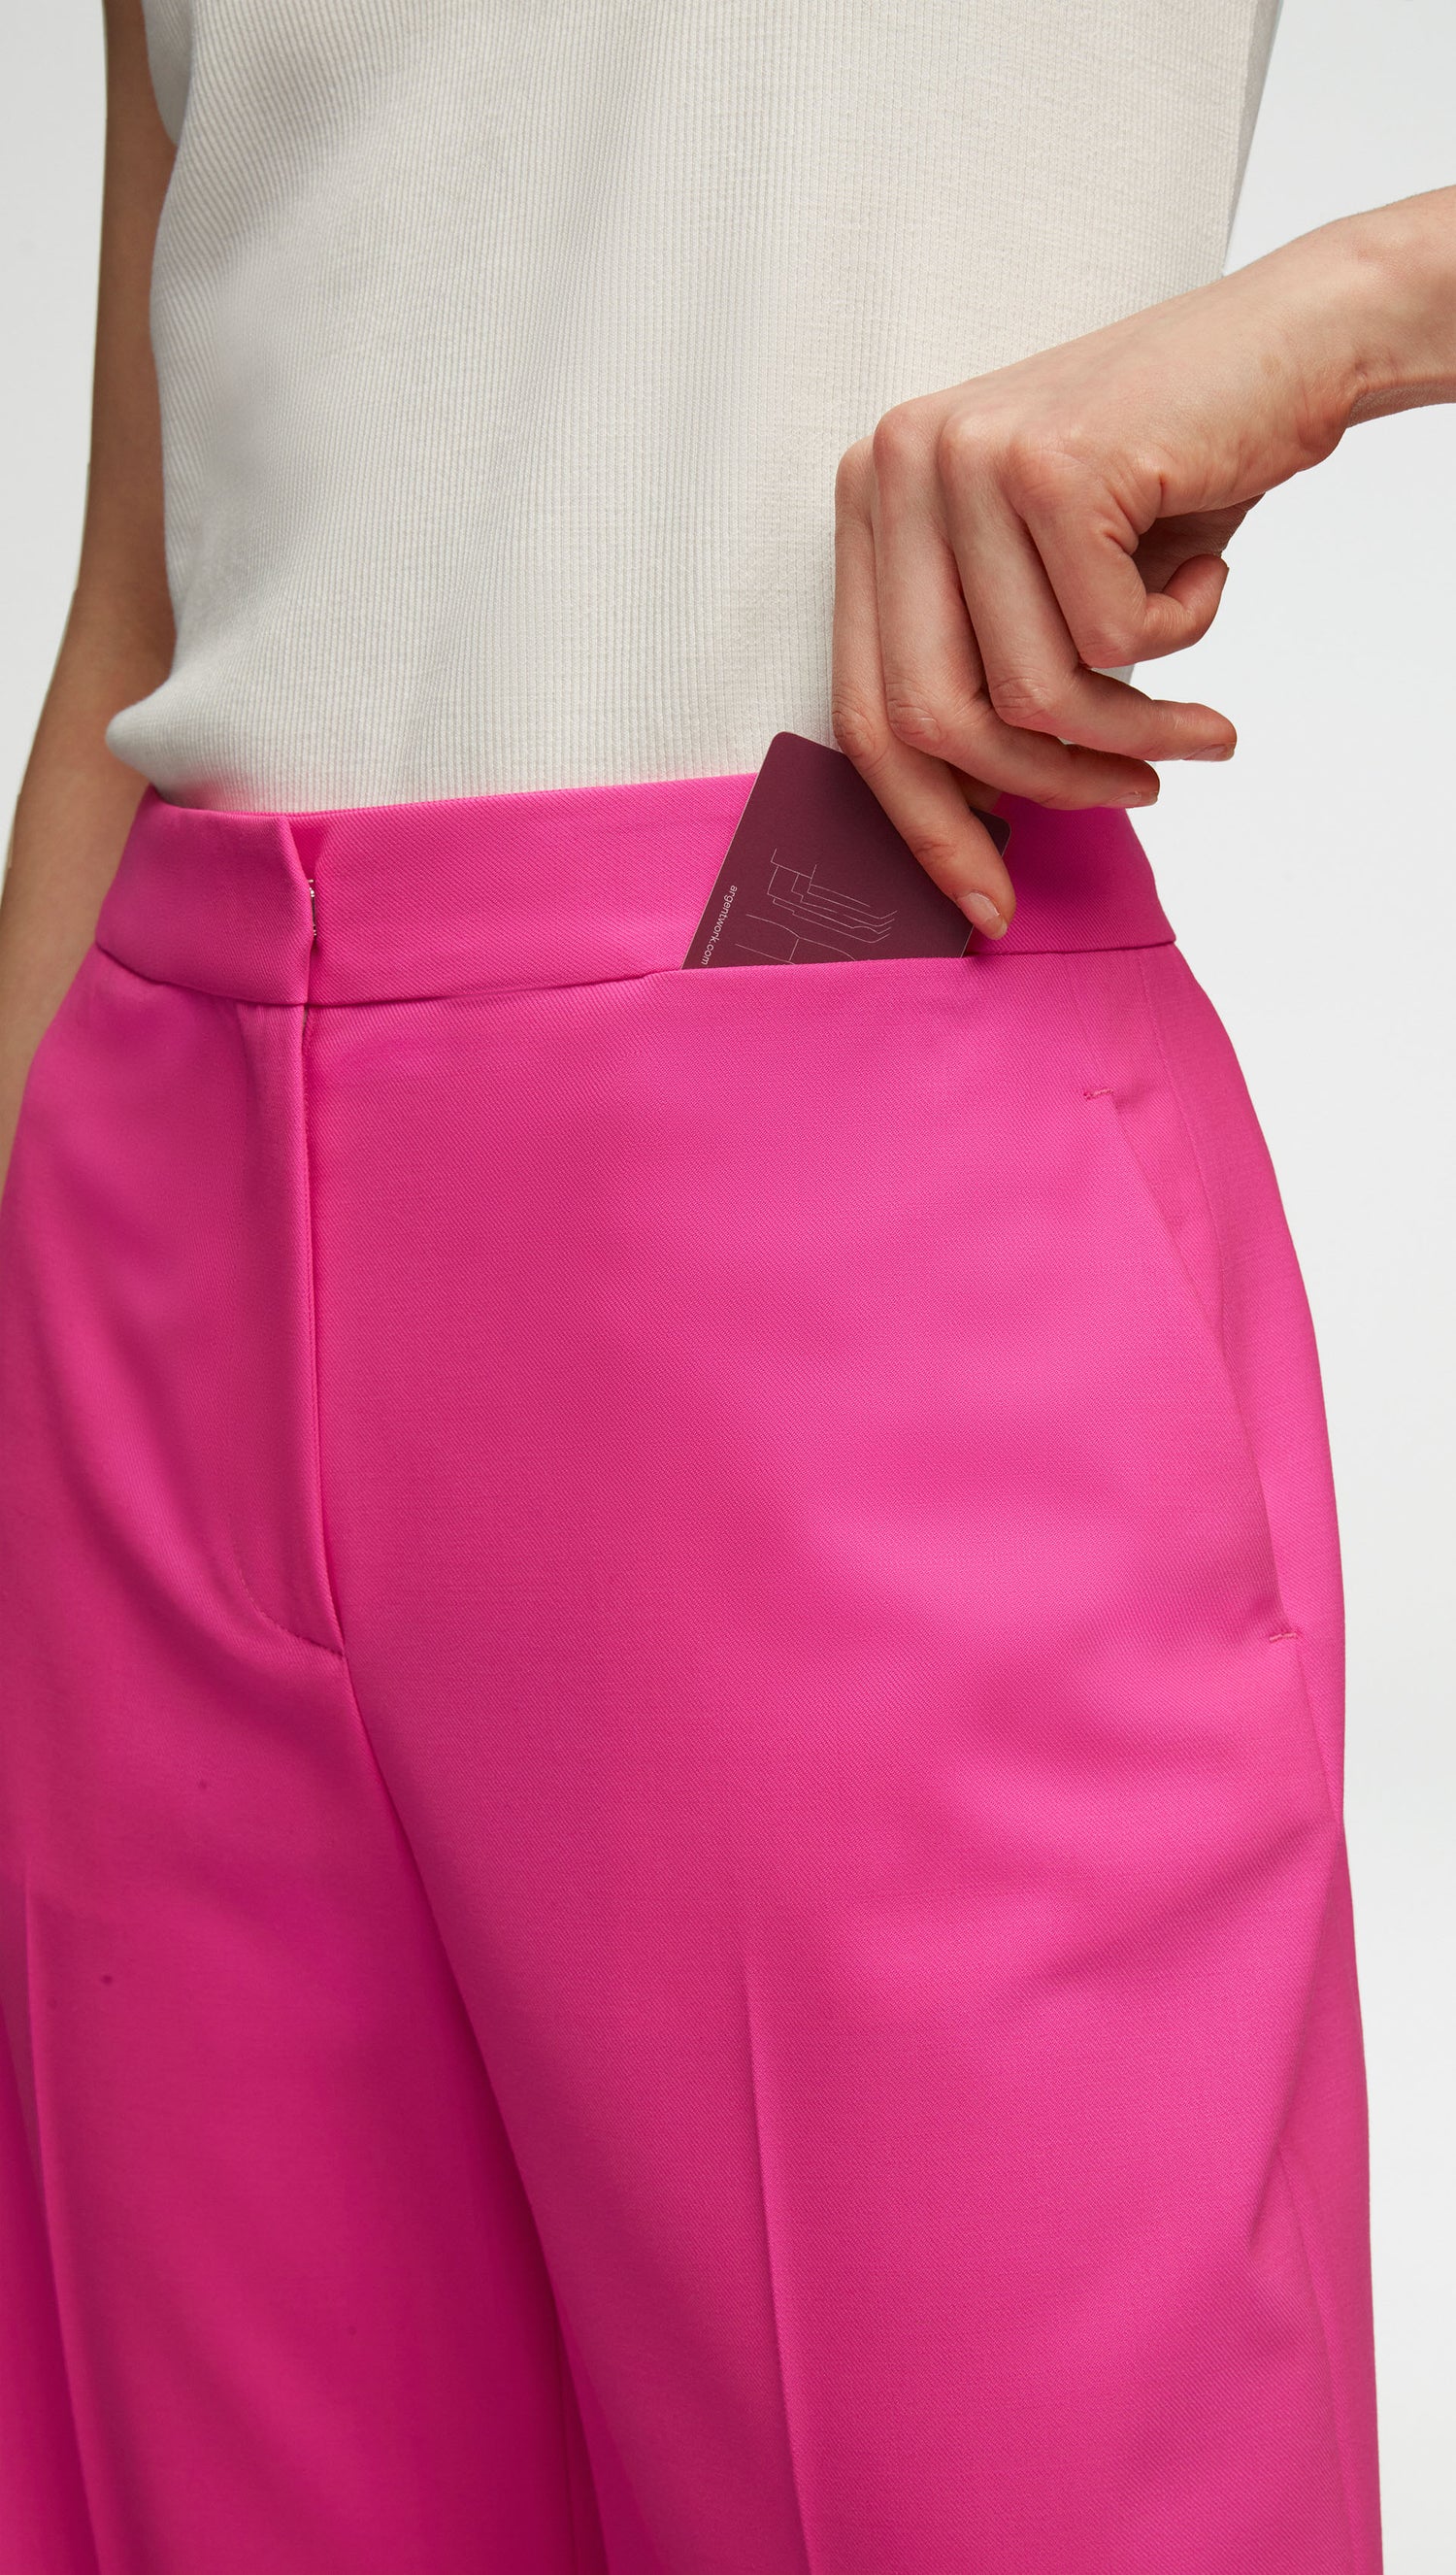 Dunnes Stores fans in a frenzy over new hot pink tailored trousers - priced  at just €30 | The Irish Sun